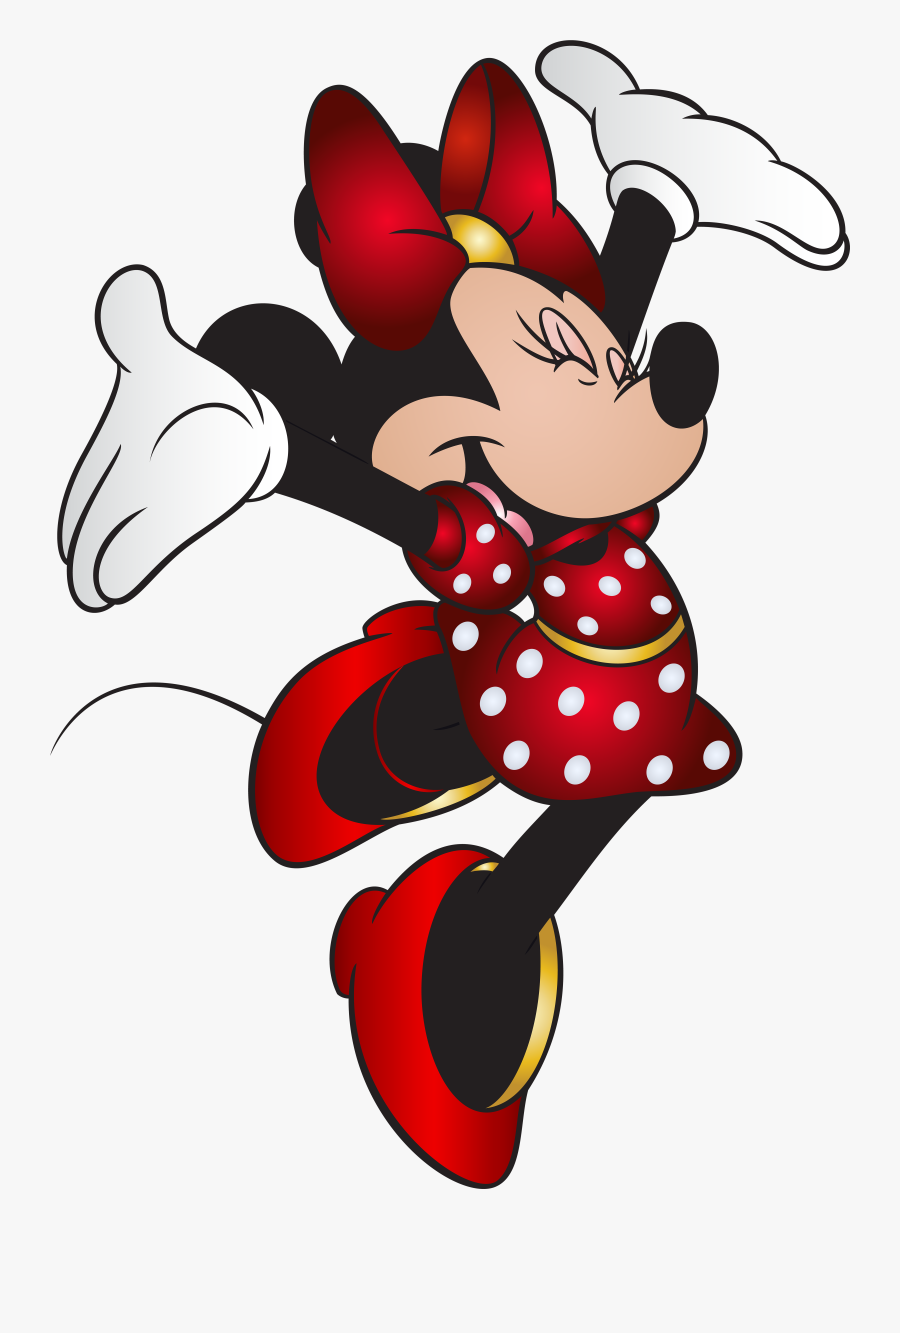 Minnie Mouse Free Png Image - Minnie Mouse Cartoon Png, Transparent Clipart